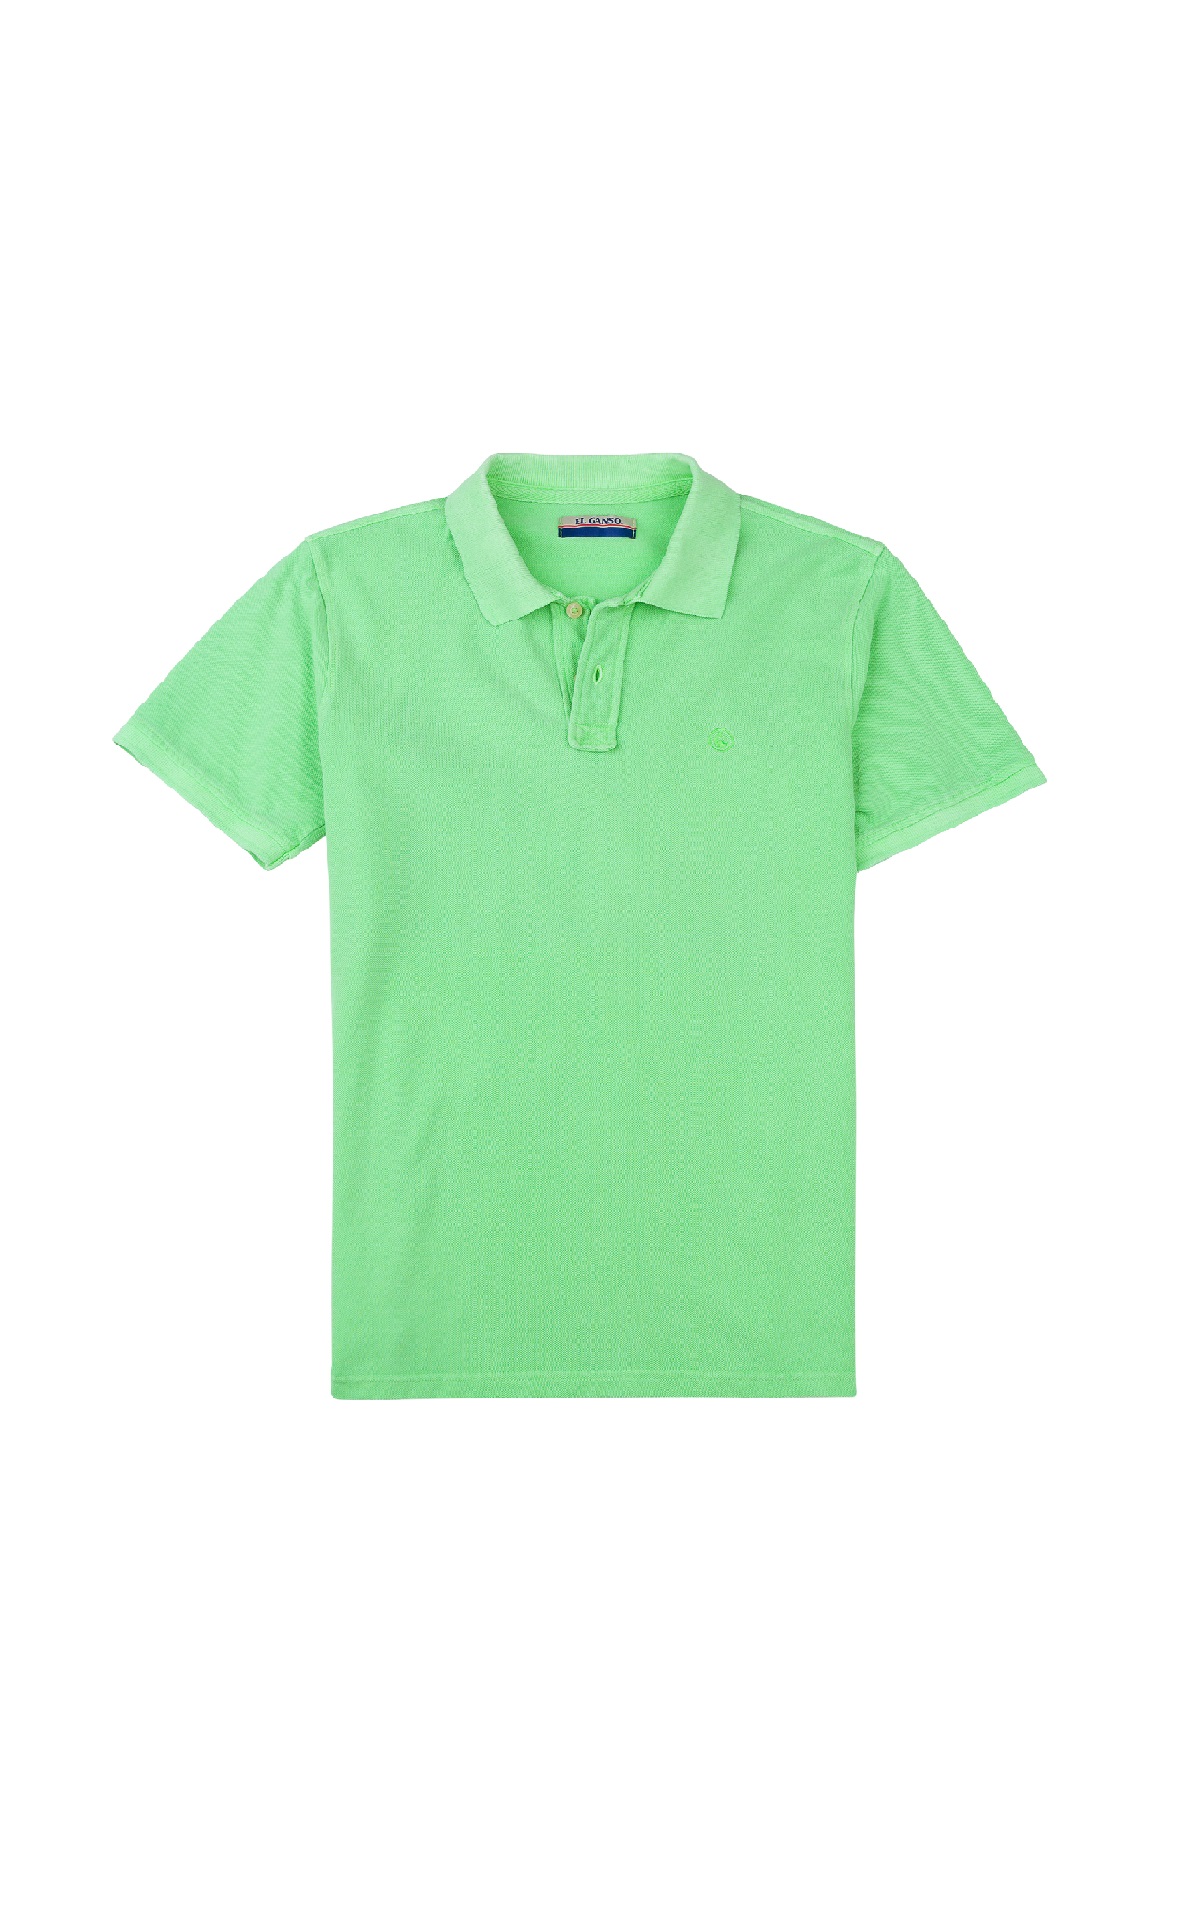 Green polo shirt for men from El Ganso